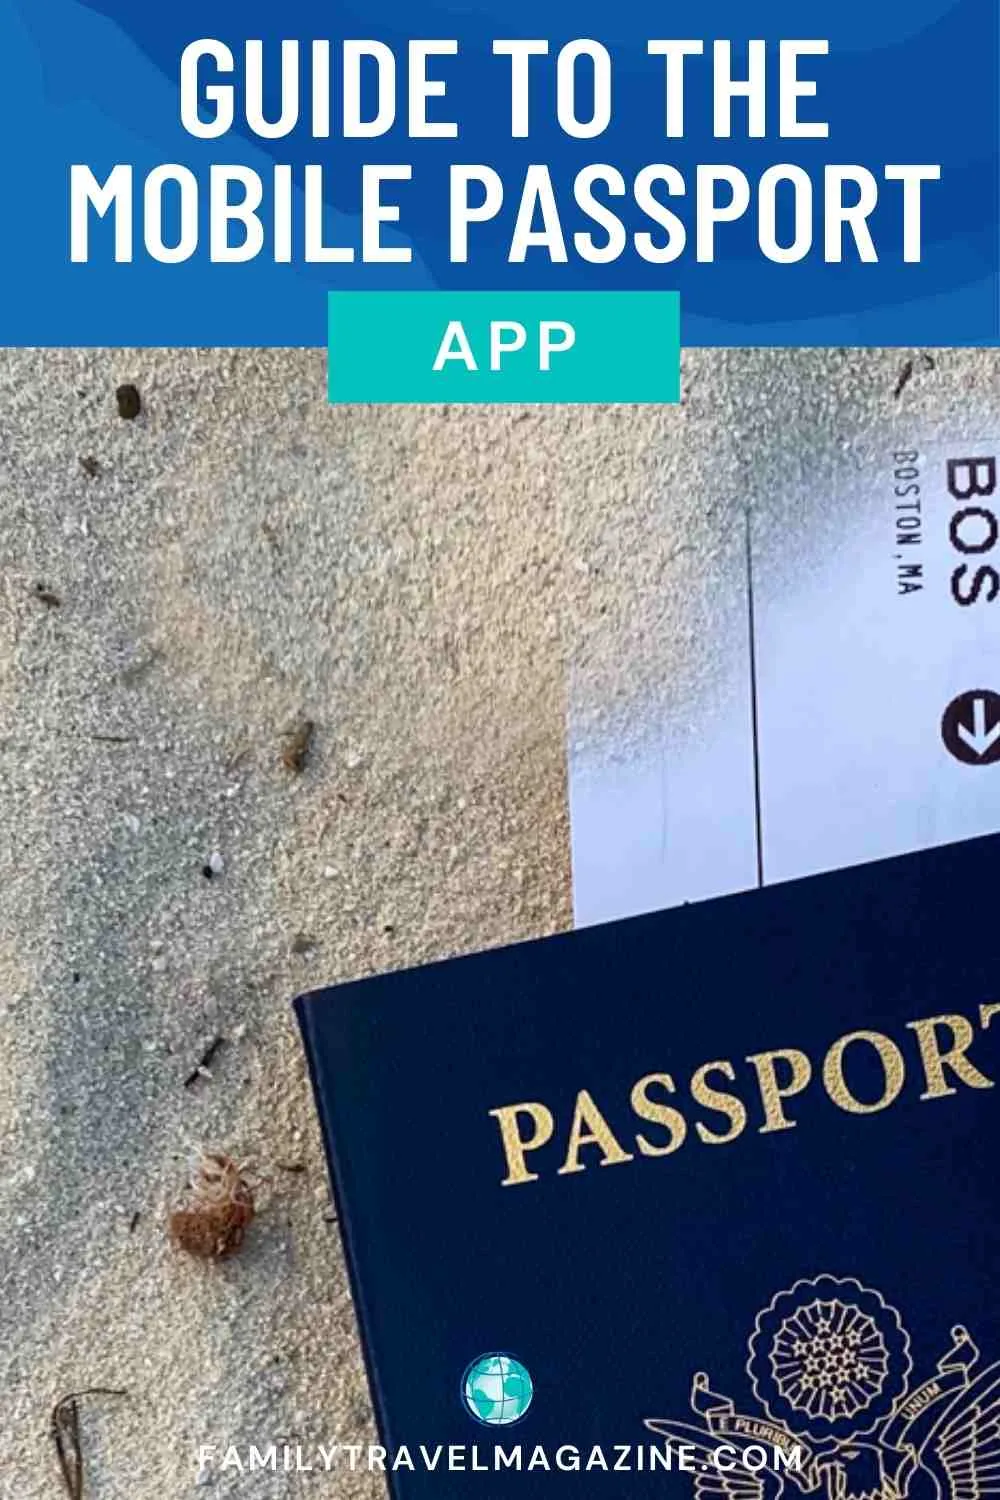 Passport and boarding pass in the sand.